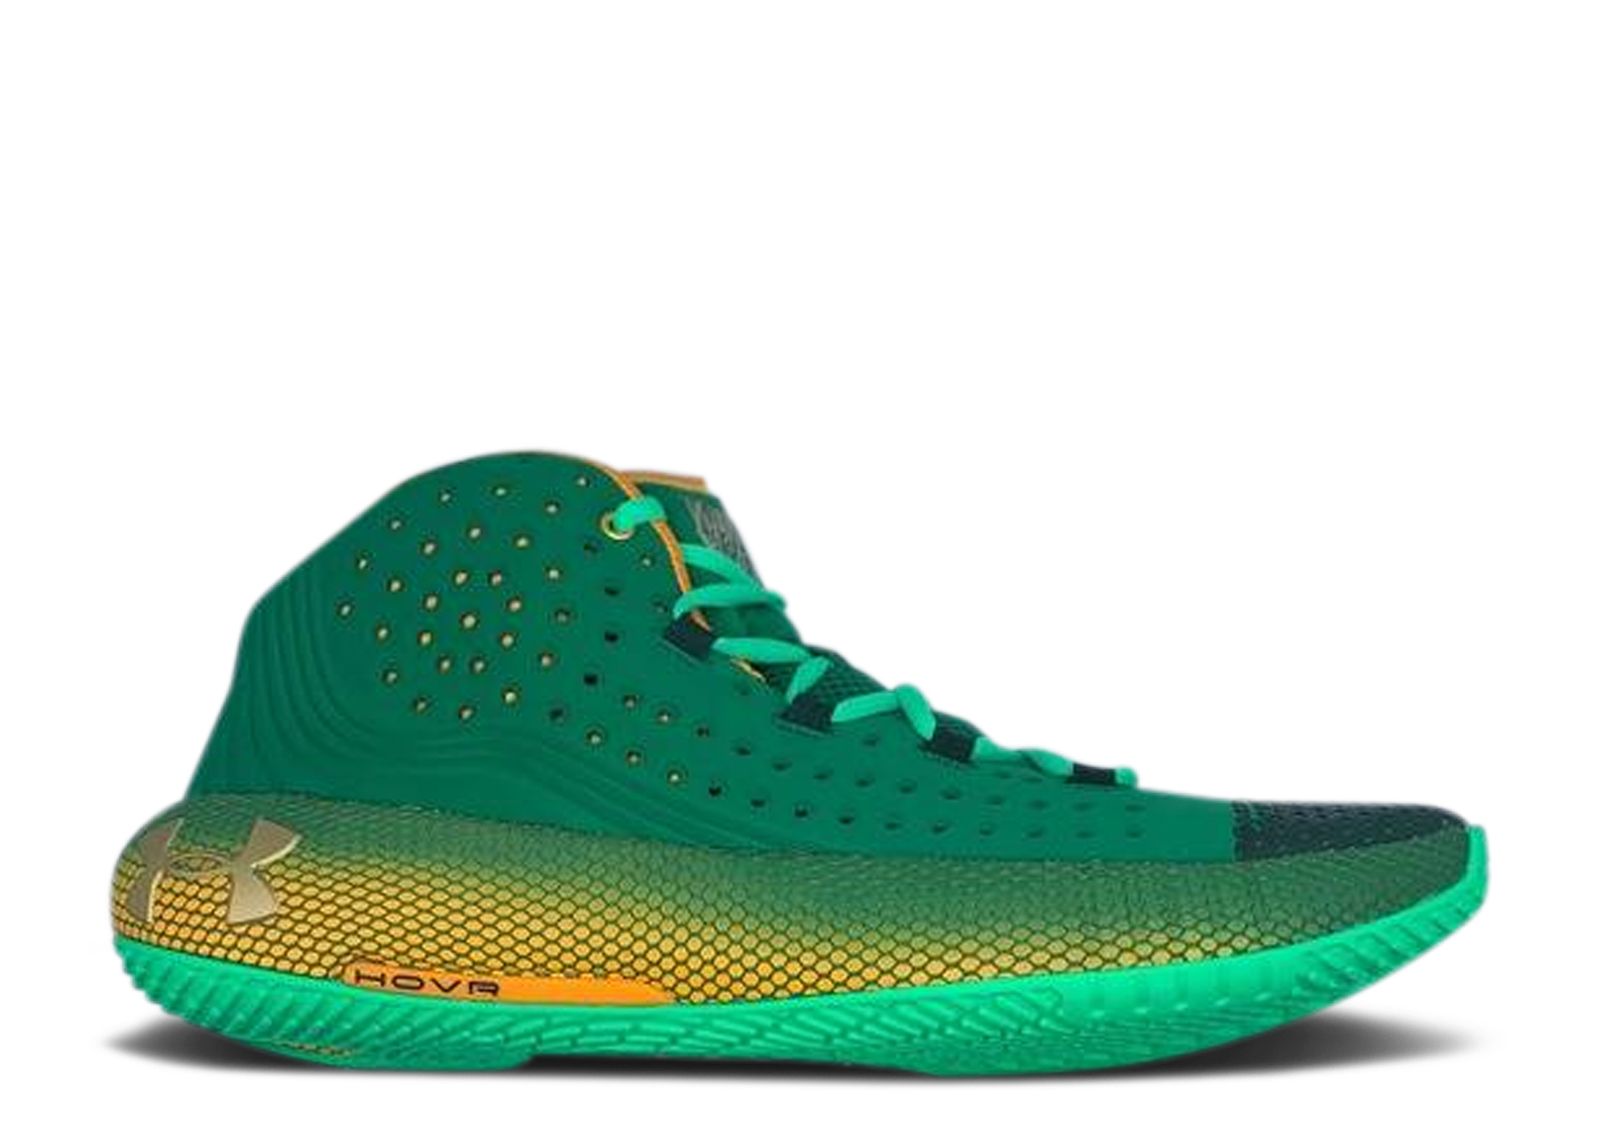 Wmns HOVR Havoc 2 MM TB 'Green' - Under Armour - 3023844 303 